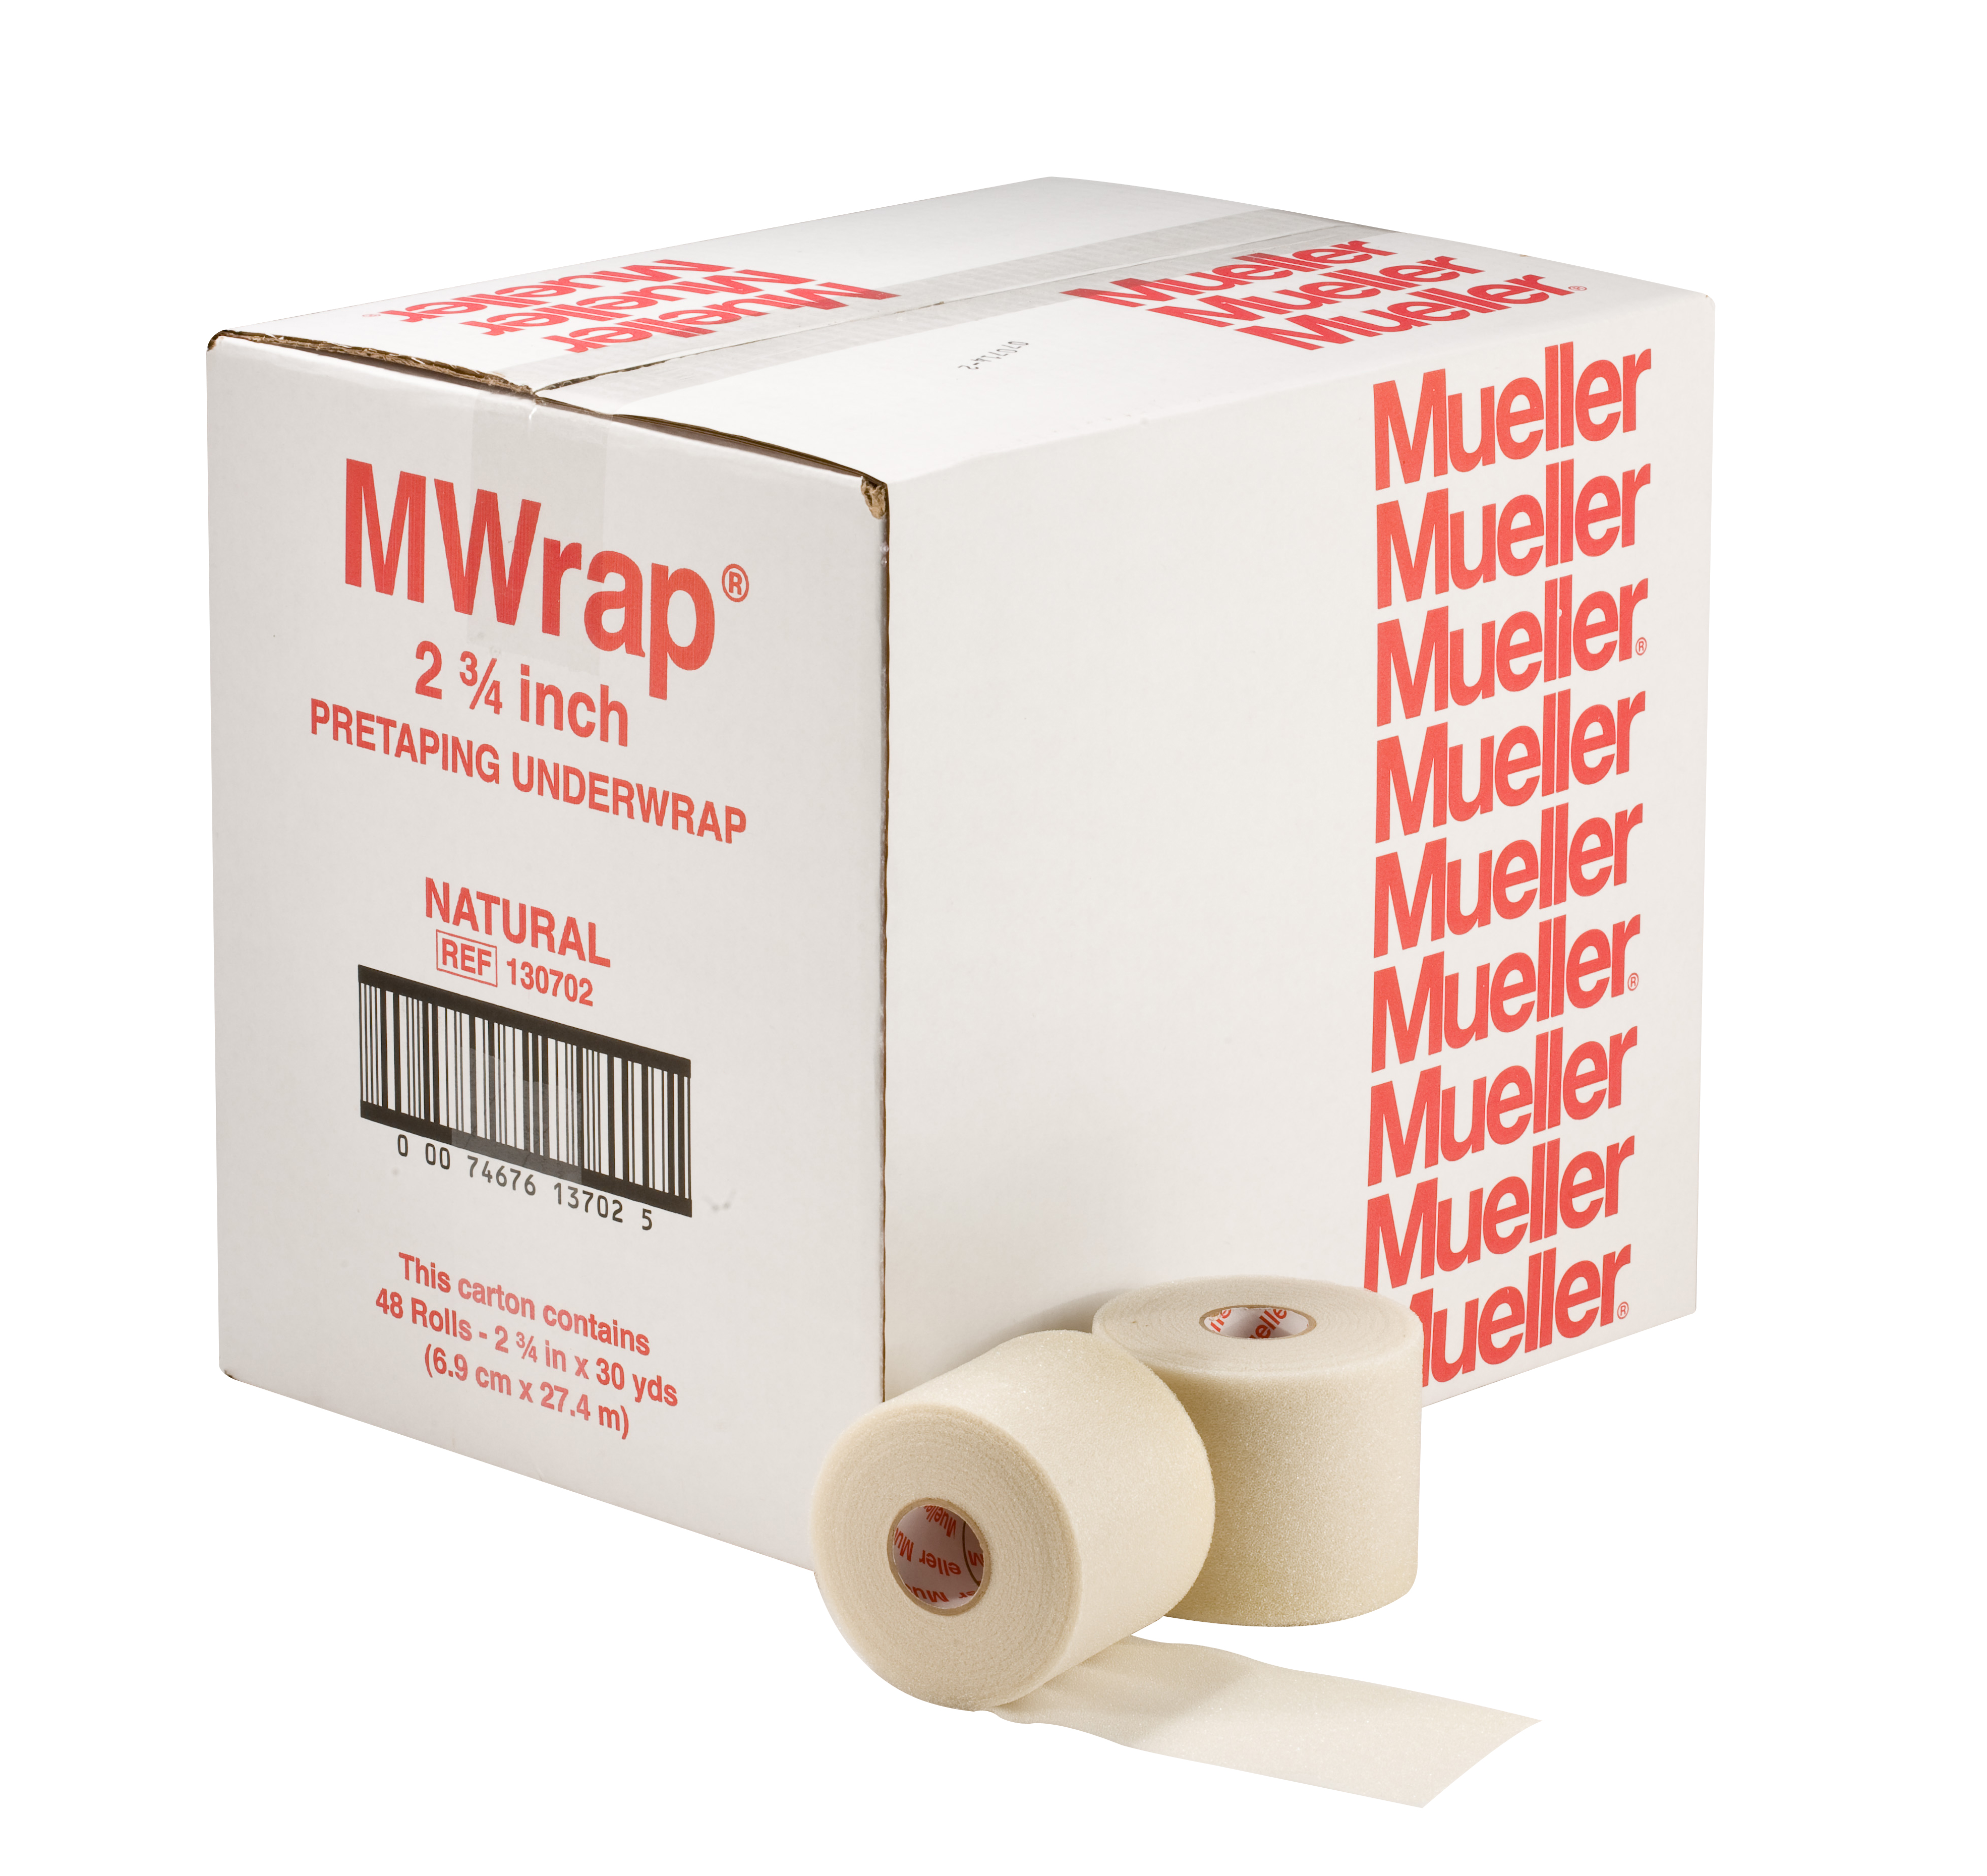 MUELLER® PRE TAPING FOAM UNDER WRAP, NATURAL, , large image number null